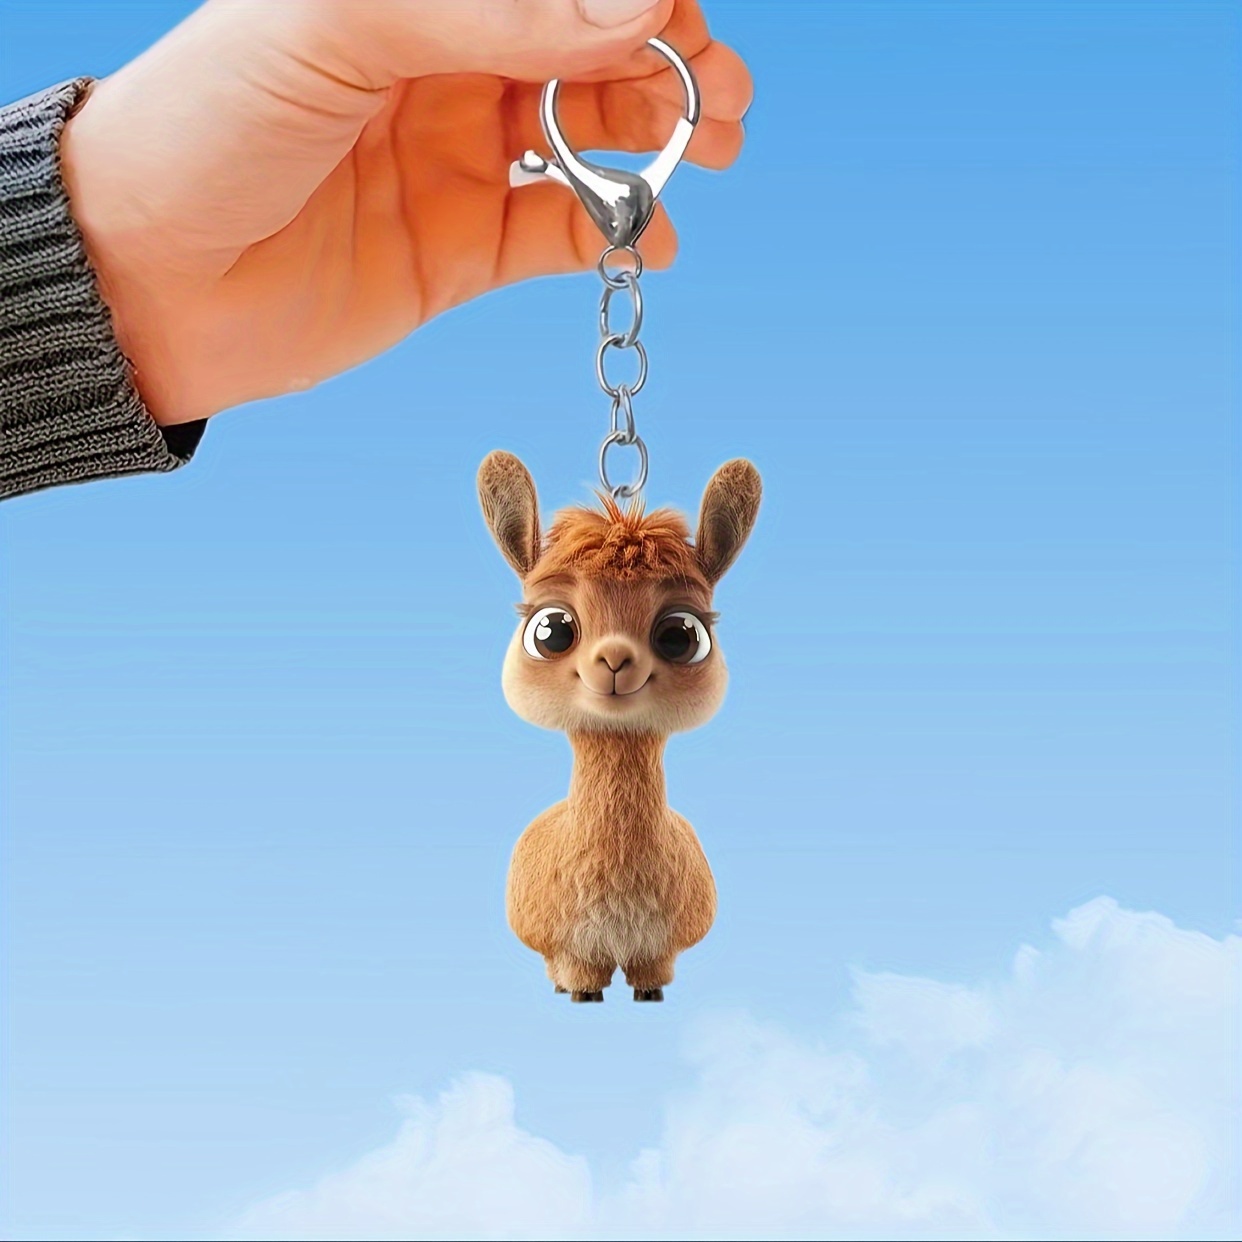 

Cute Alpaca Acrylic Keychain - 1pc, Perfect For Backpacks & Car Keys, Ideal Gift For Pet Lovers